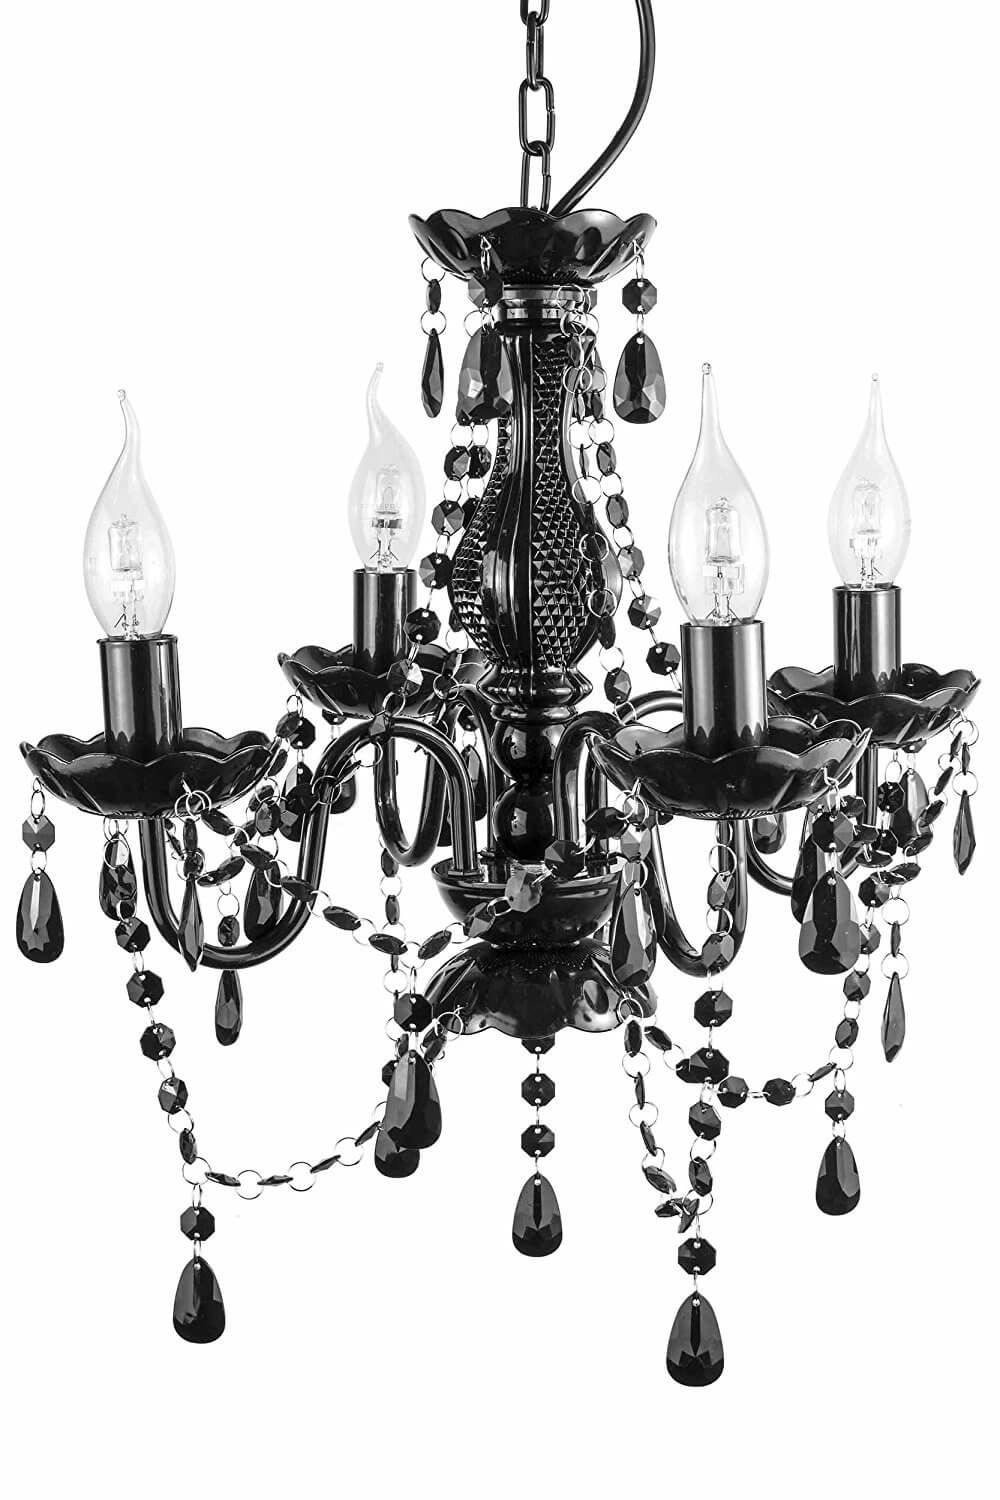 A2s Gypsy Crystal Chandelier Small Black 4 Arm H18 W15 Inside Small Gypsy Chandeliers (View 9 of 25)